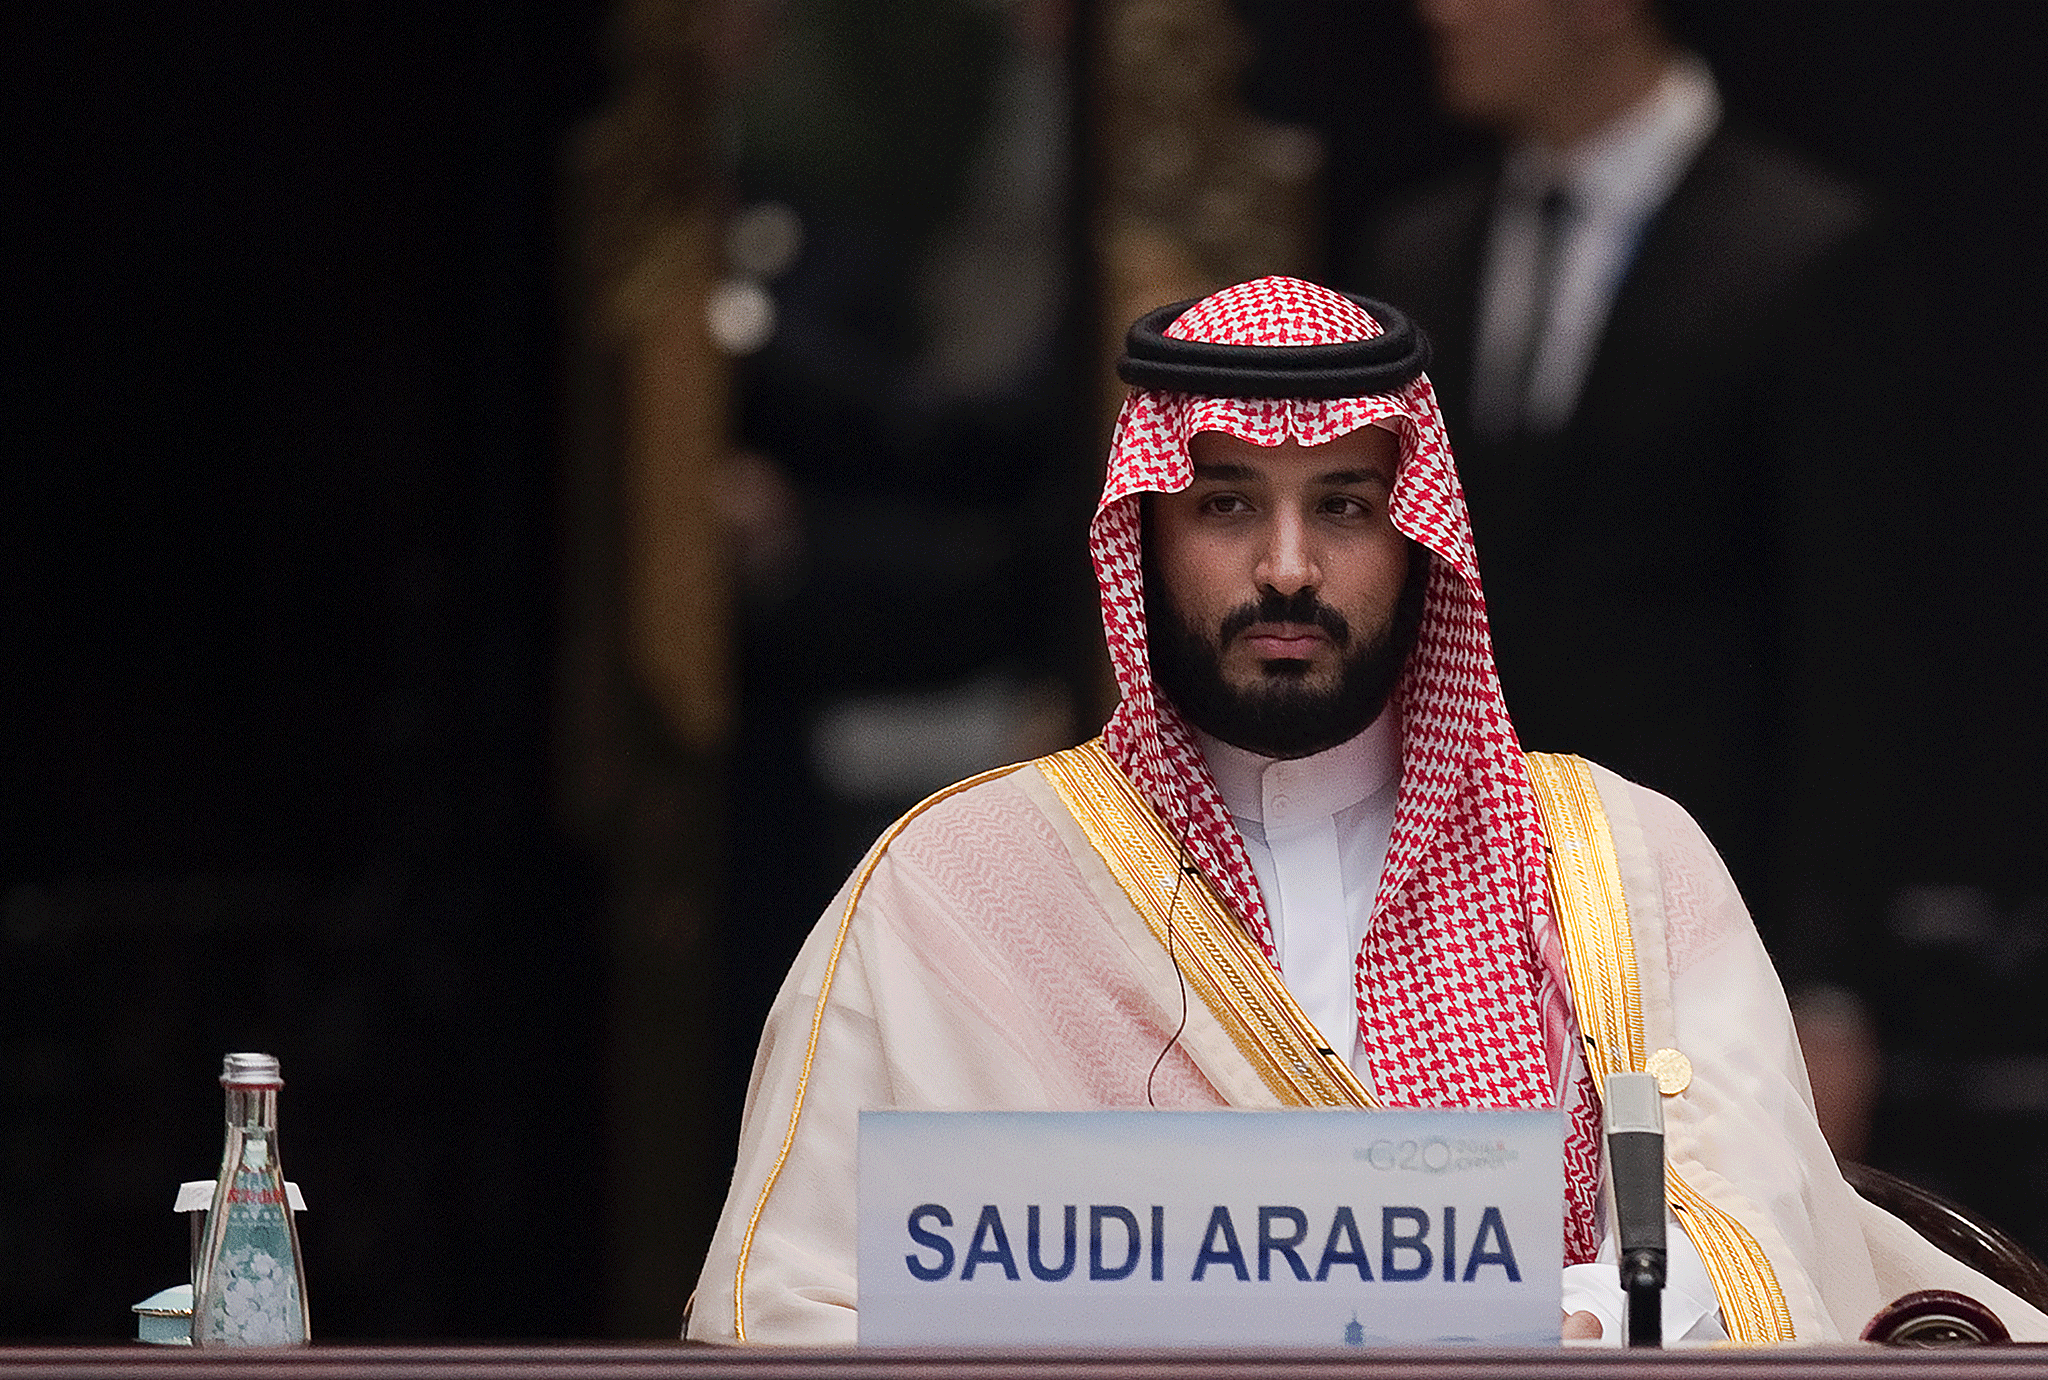 Deputy Crown Prince and Defence Minister Prince Mohammed bin Salman is the most powerful figure in Saudi decision making